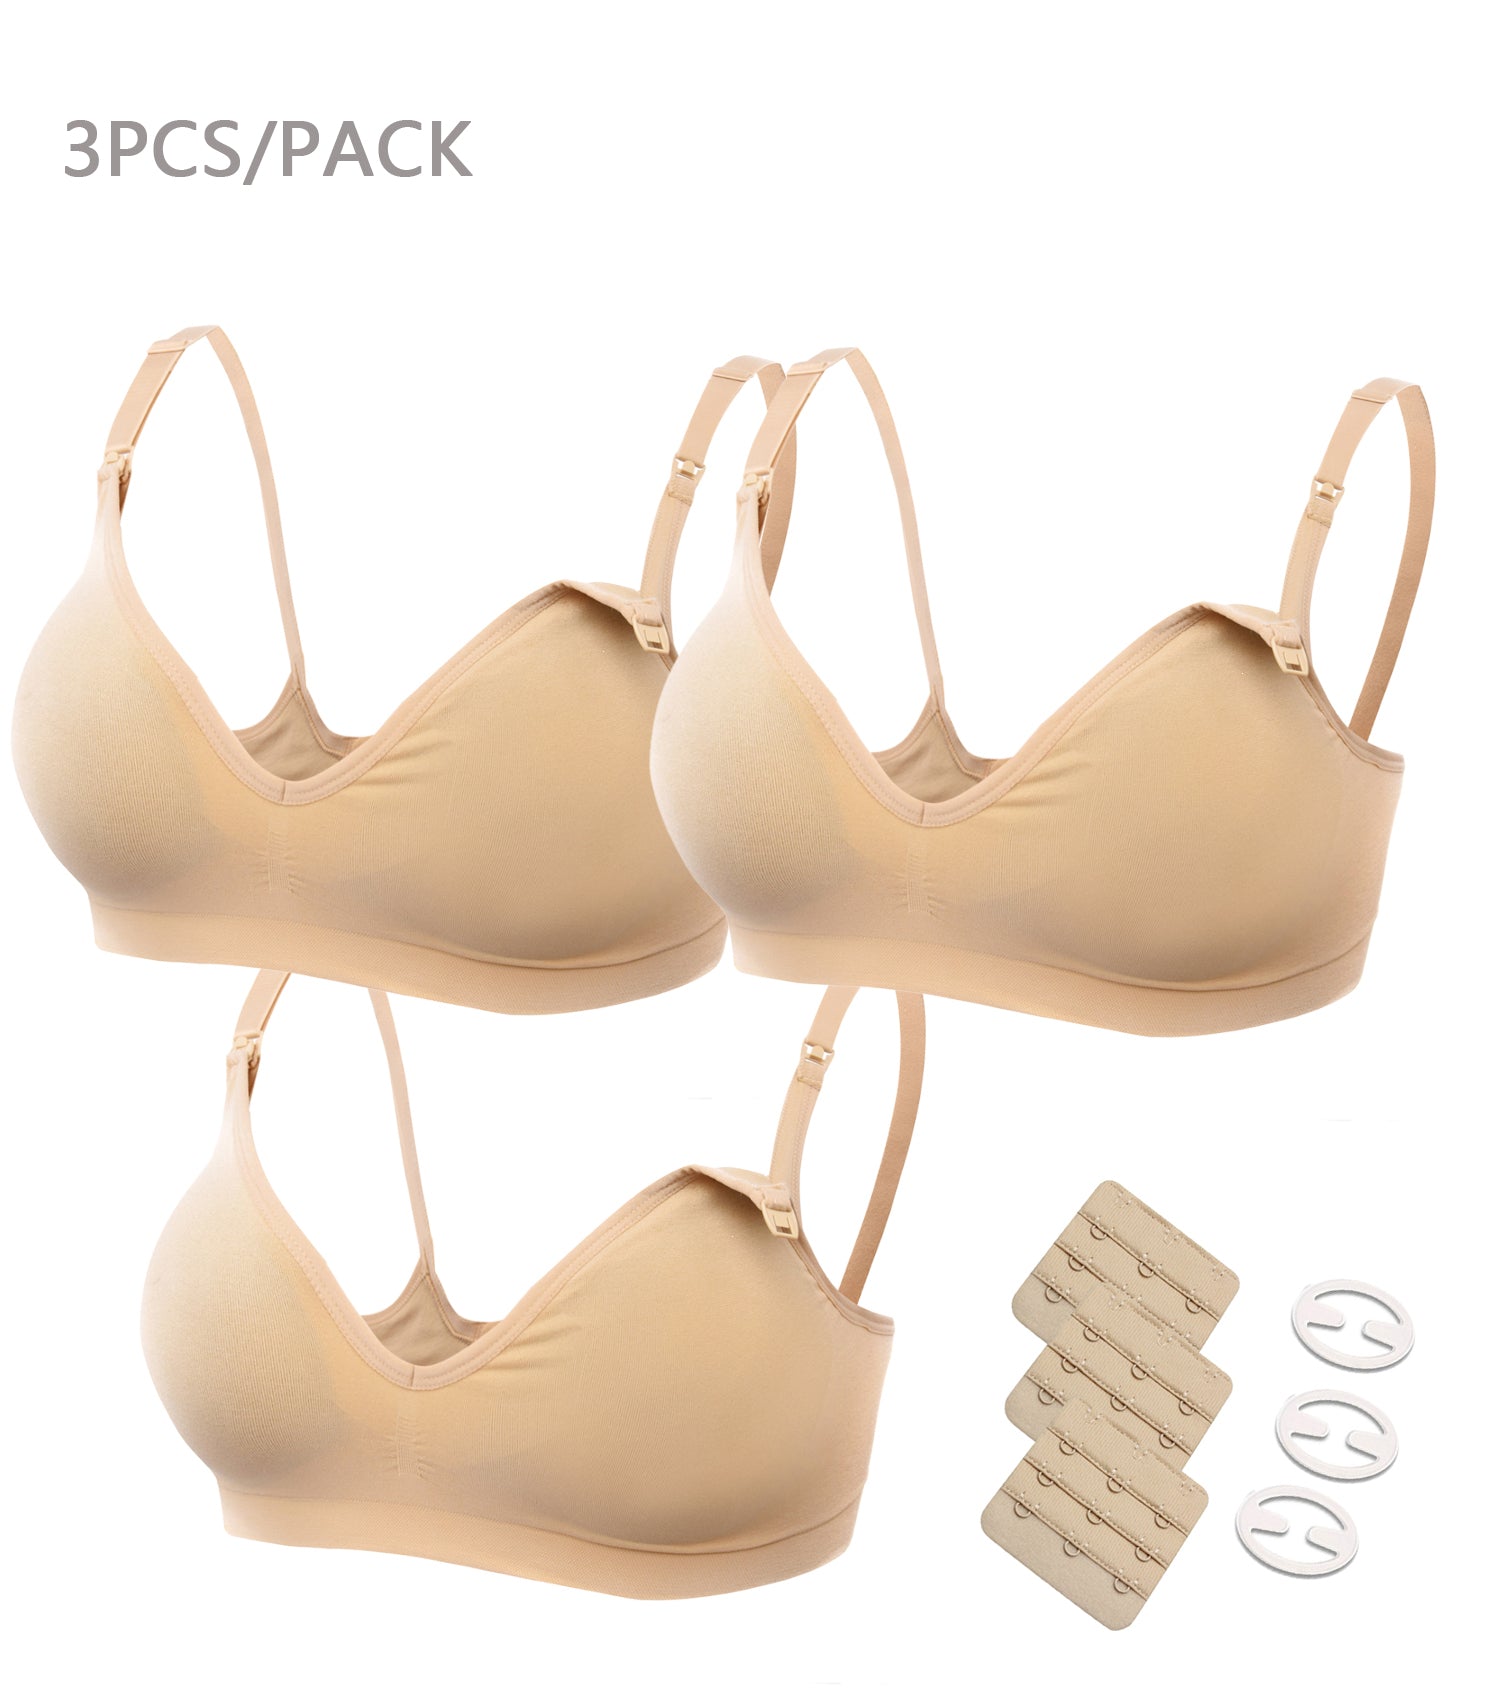 Maternity Intimates Sexy Bralette Deep V Bras For Women Triangle